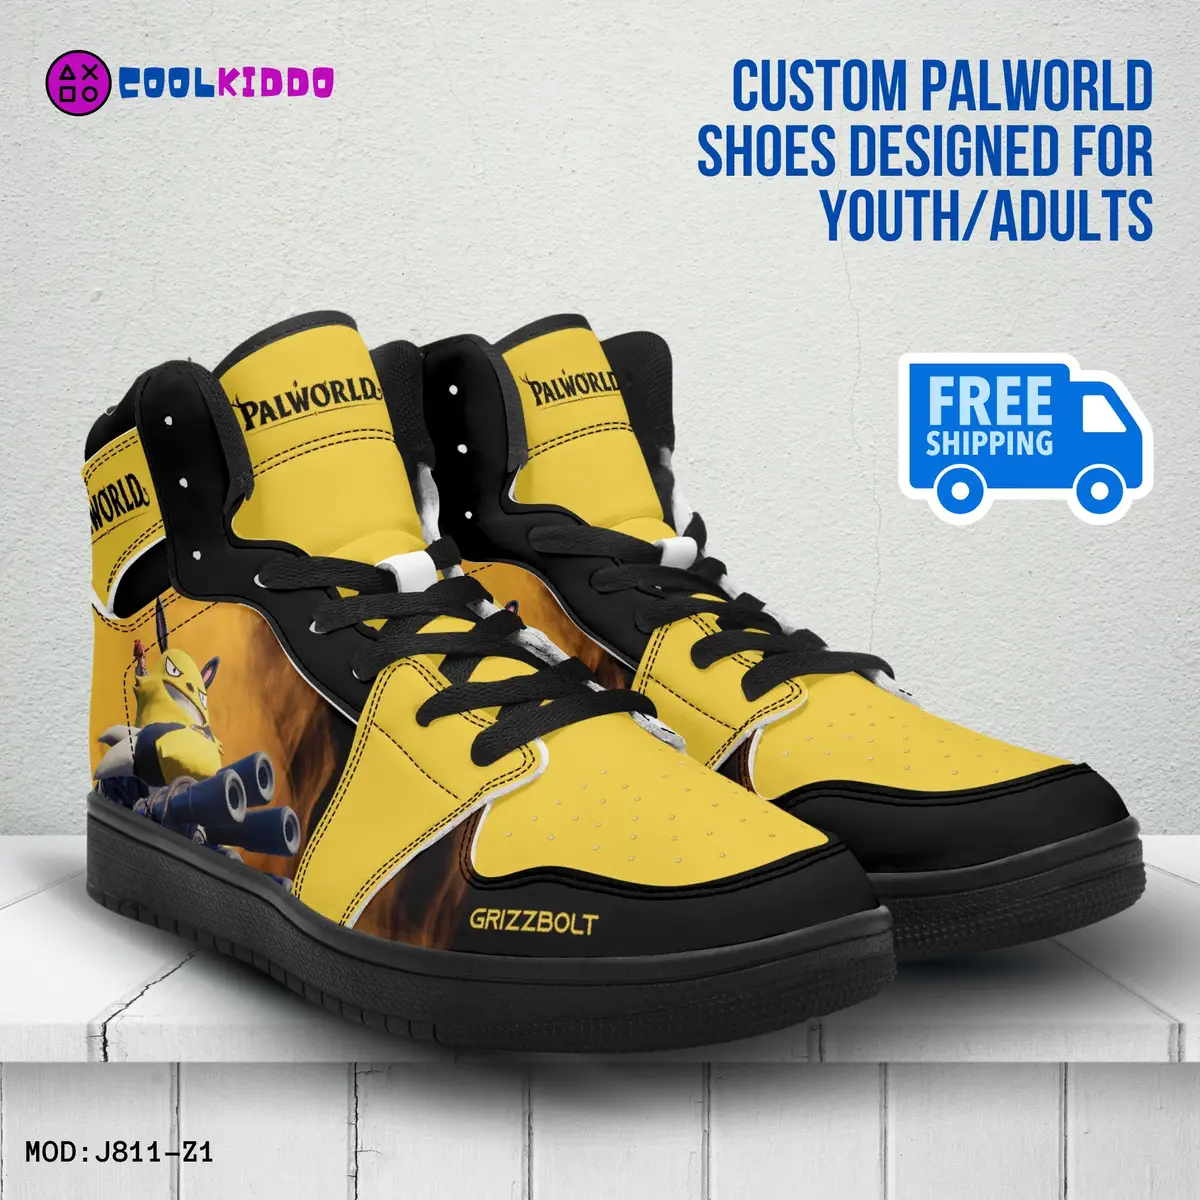 Grizzbolt Palworld New Video Game High-Top Shoes, Leather Sneakers for Youth/Adult Cool Kiddo 12